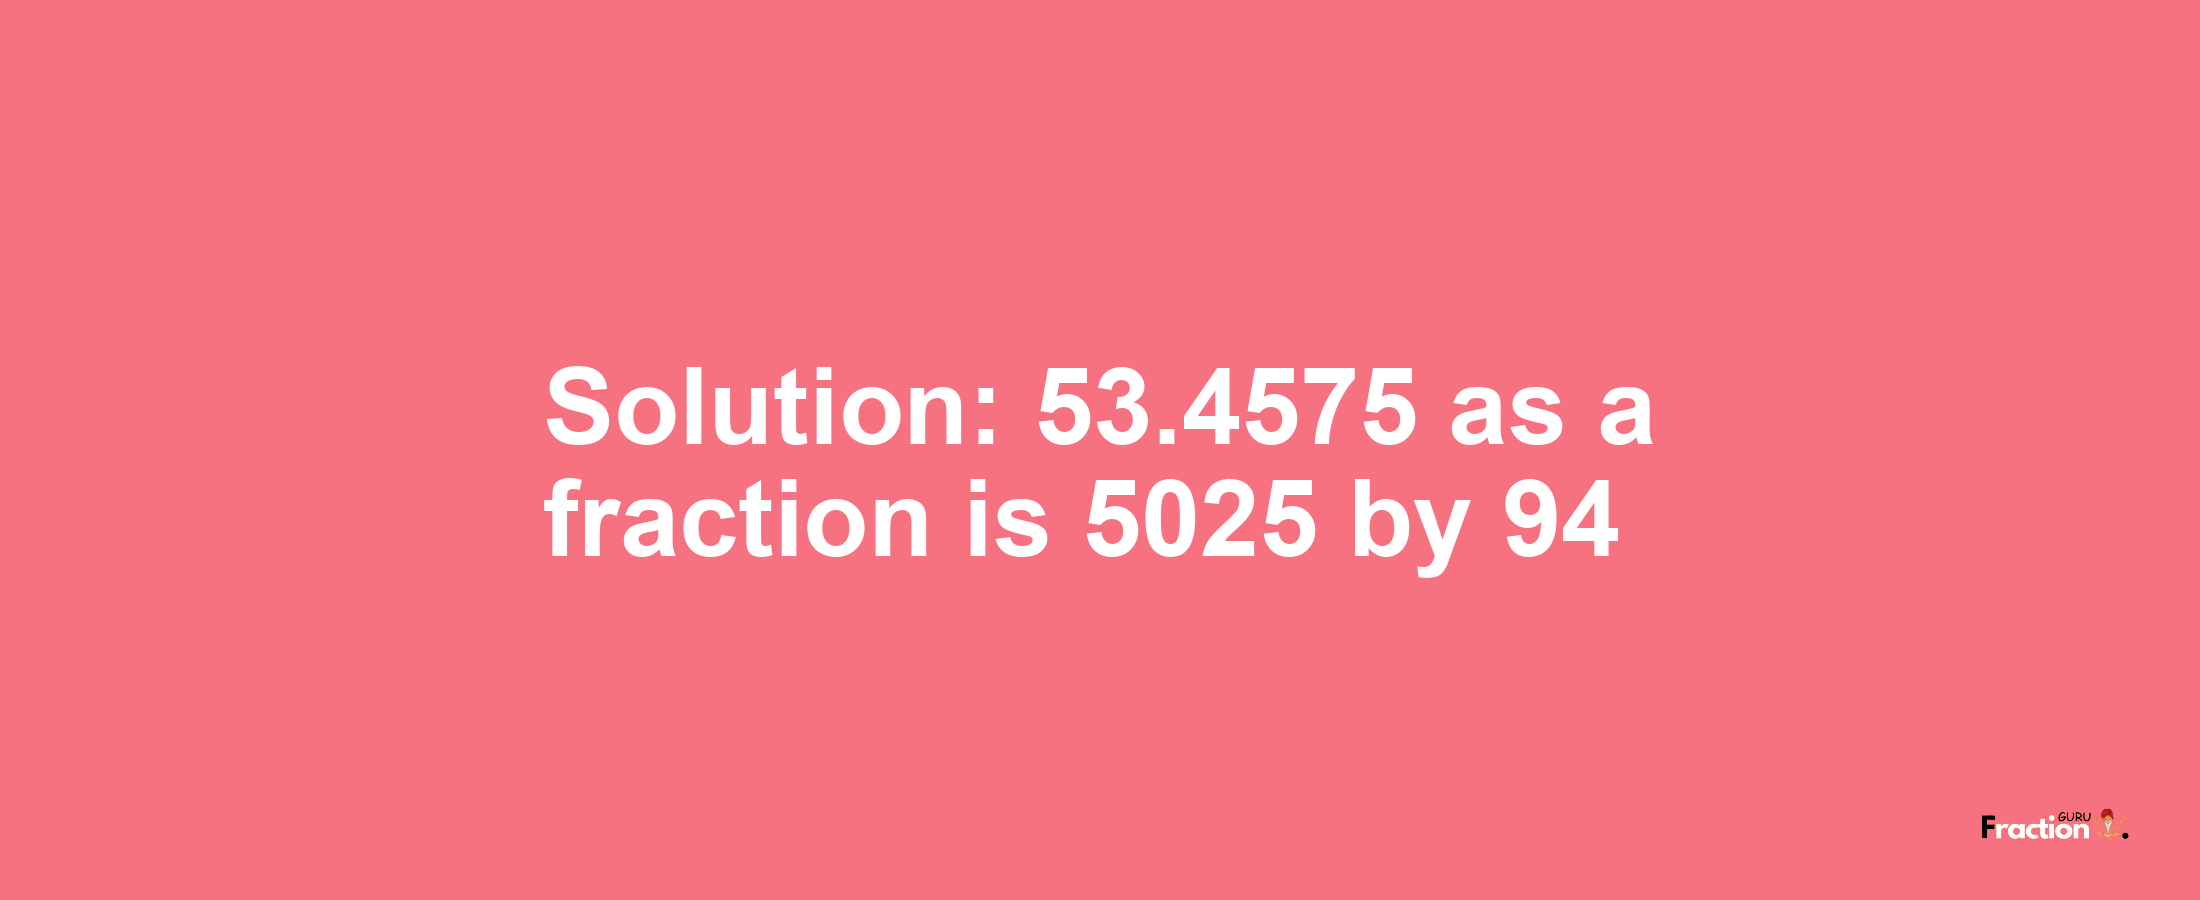 Solution:53.4575 as a fraction is 5025/94